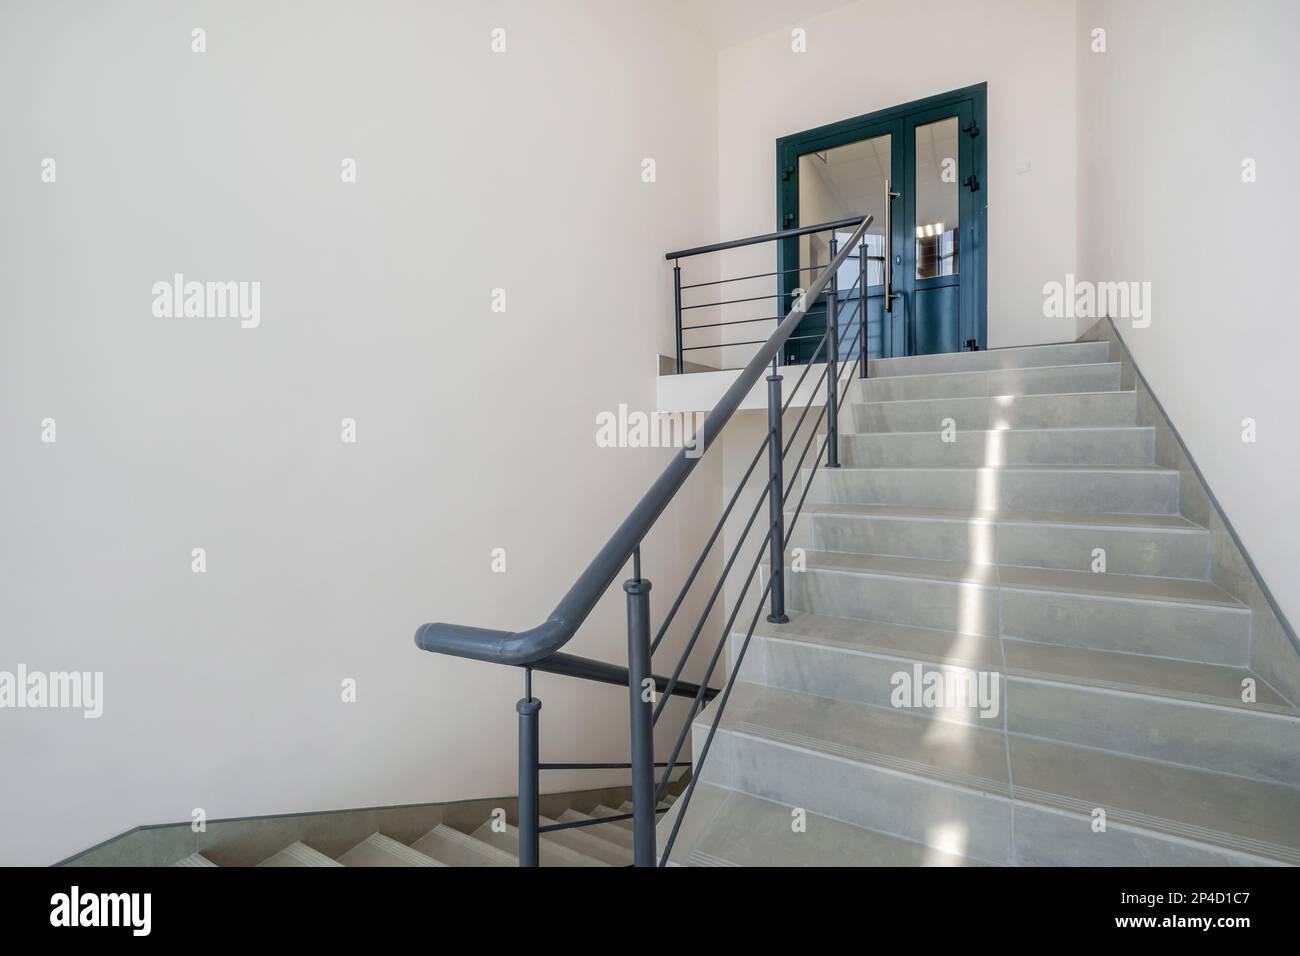 stairs  emergency and evacuation exit stair in up ladder in a new office building Stock Photo